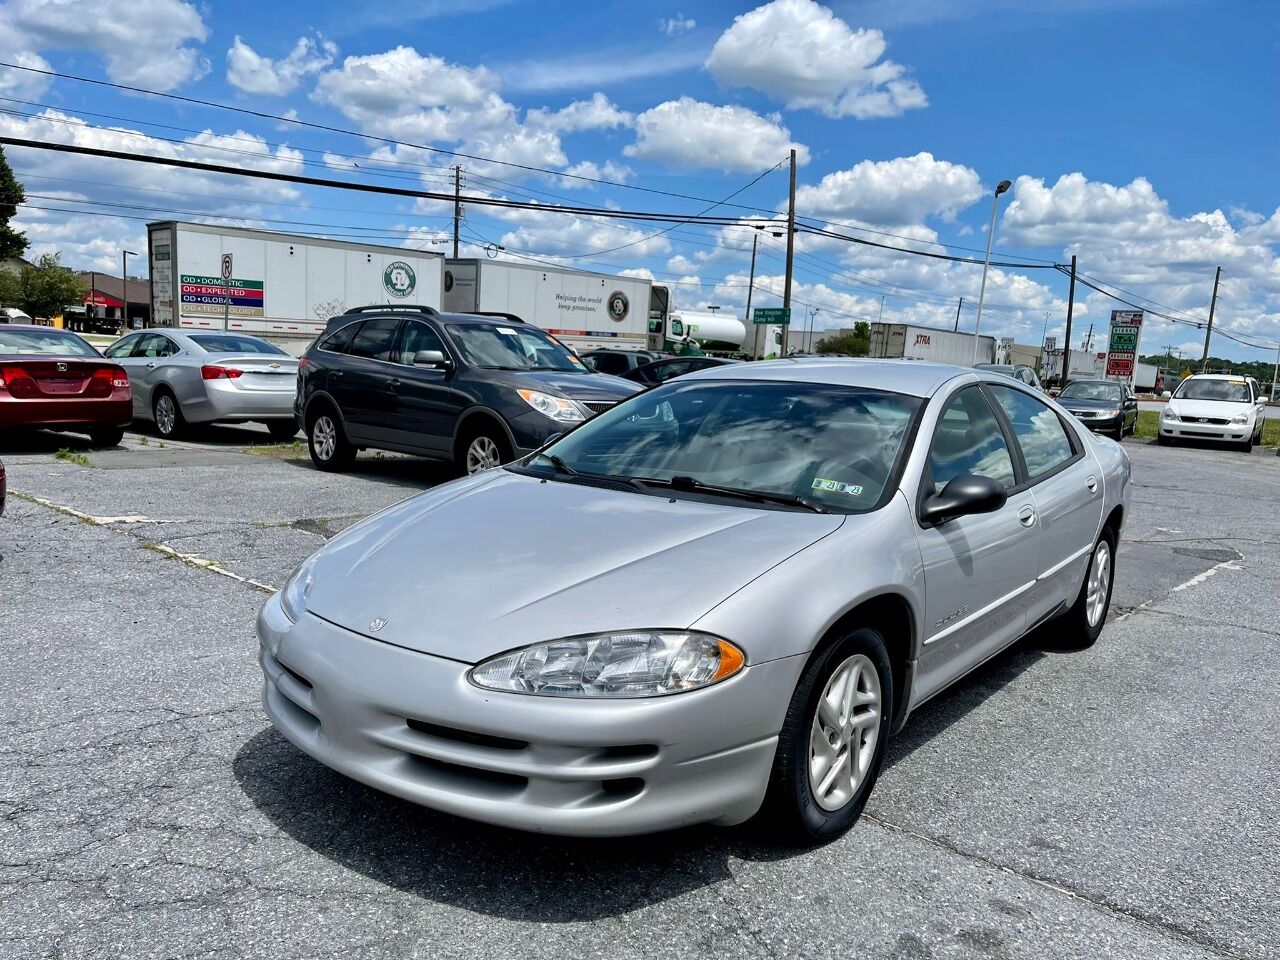 Dodge Intrepid For Sale In Hagerstown, MD - Carsforsale.com®